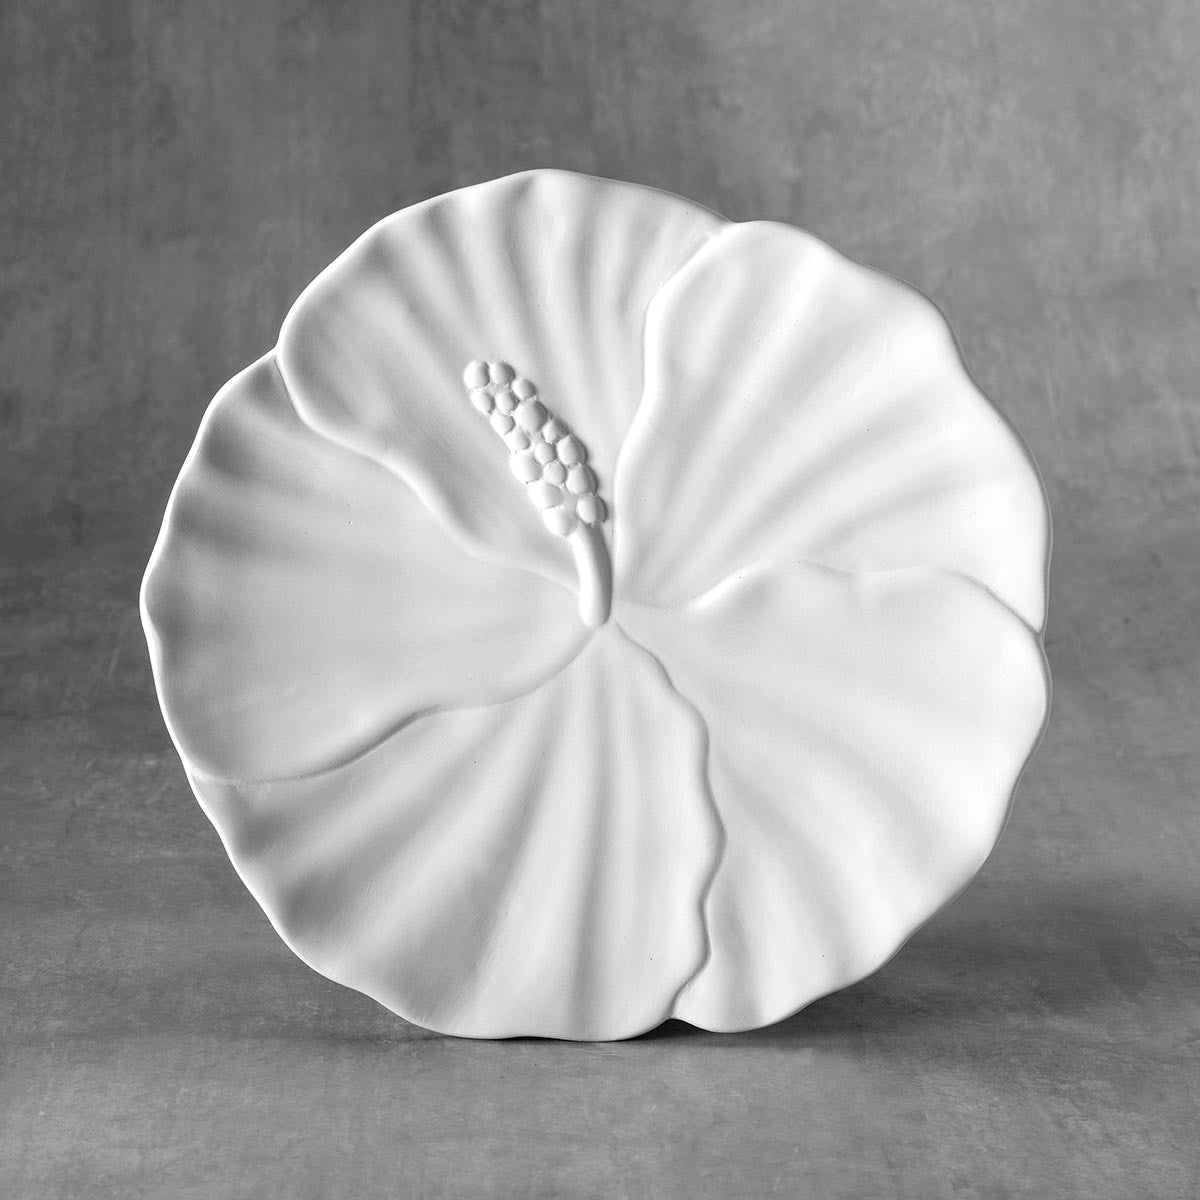 Duncan - 37483 Bisque Hibiscus Plate - Sounding Stone